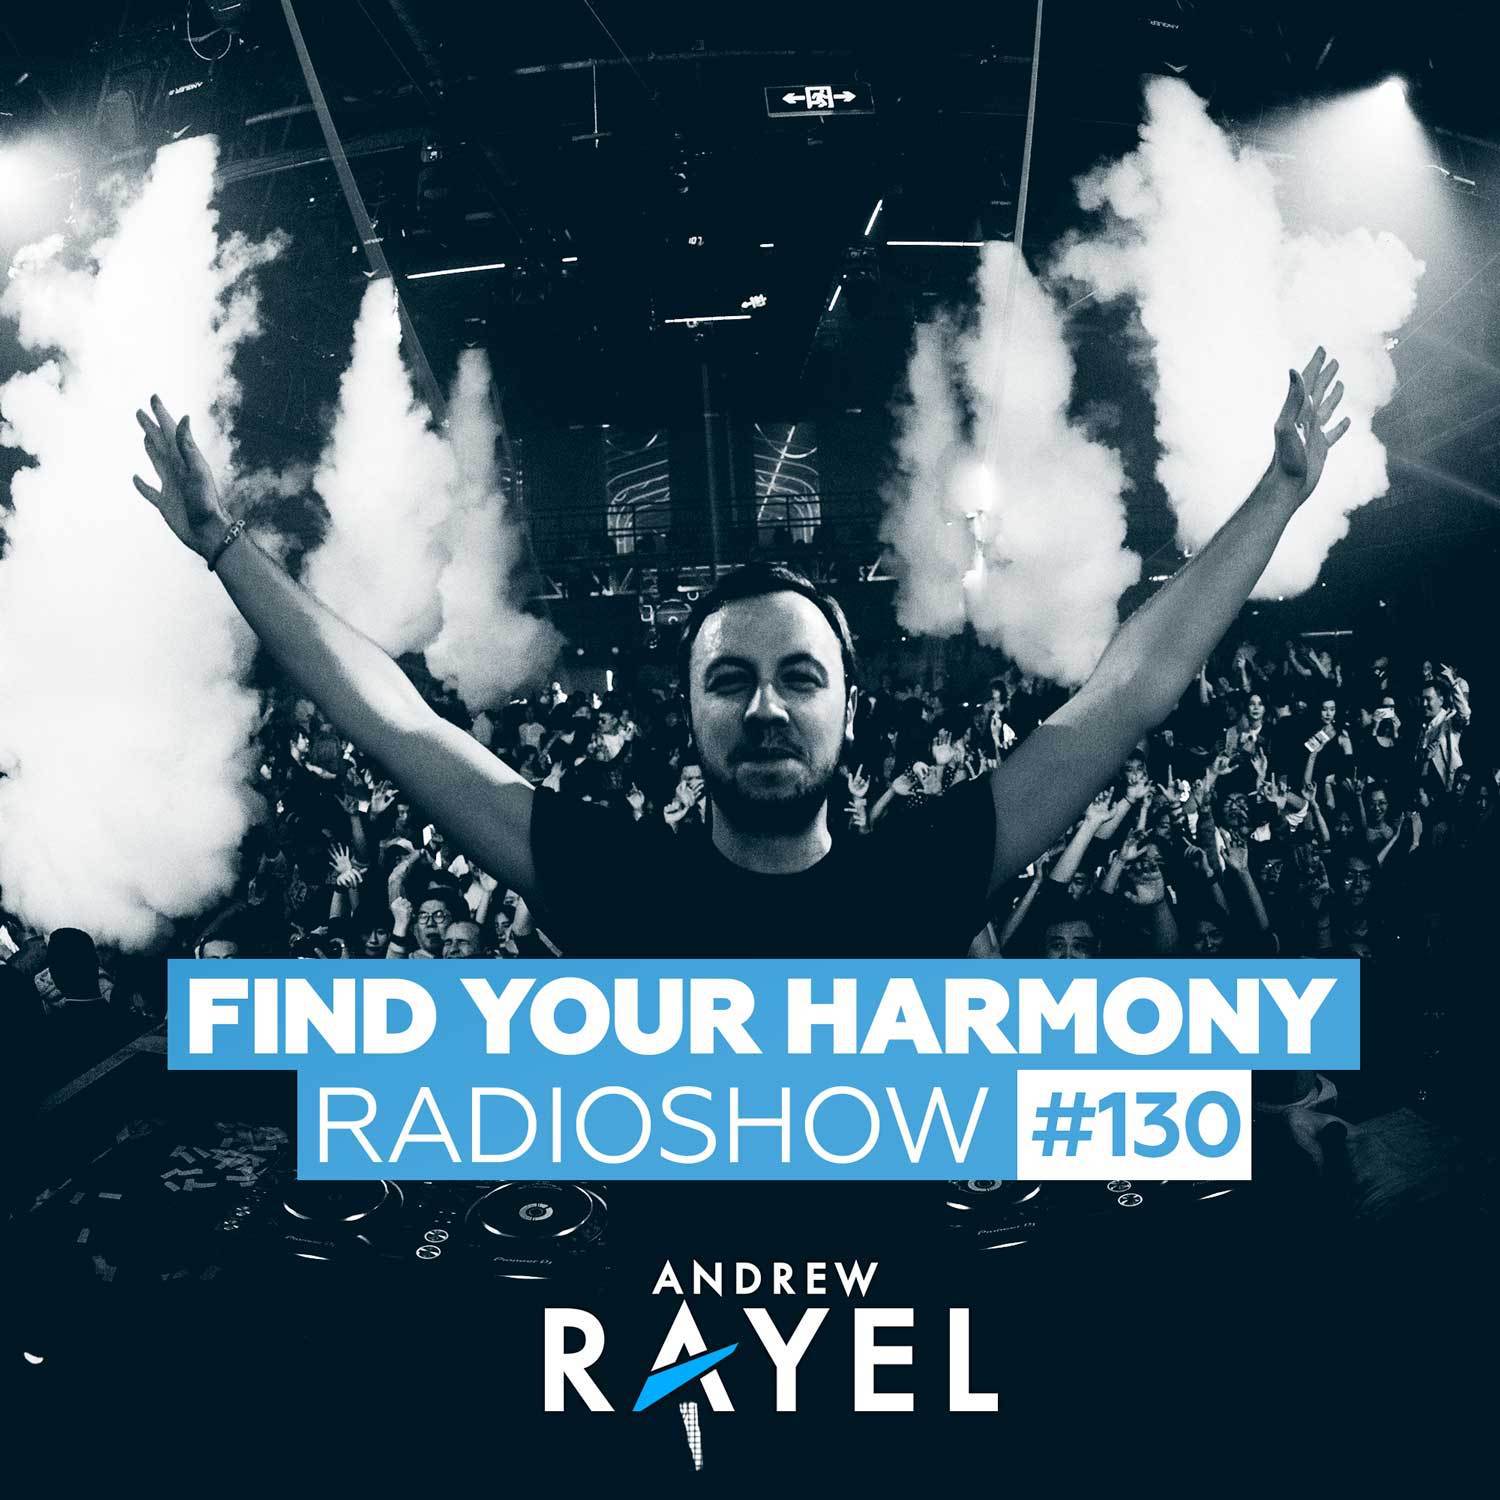 Find Your Harmony Radioshow #130 (Including Guest Mix: Alexander Popov)